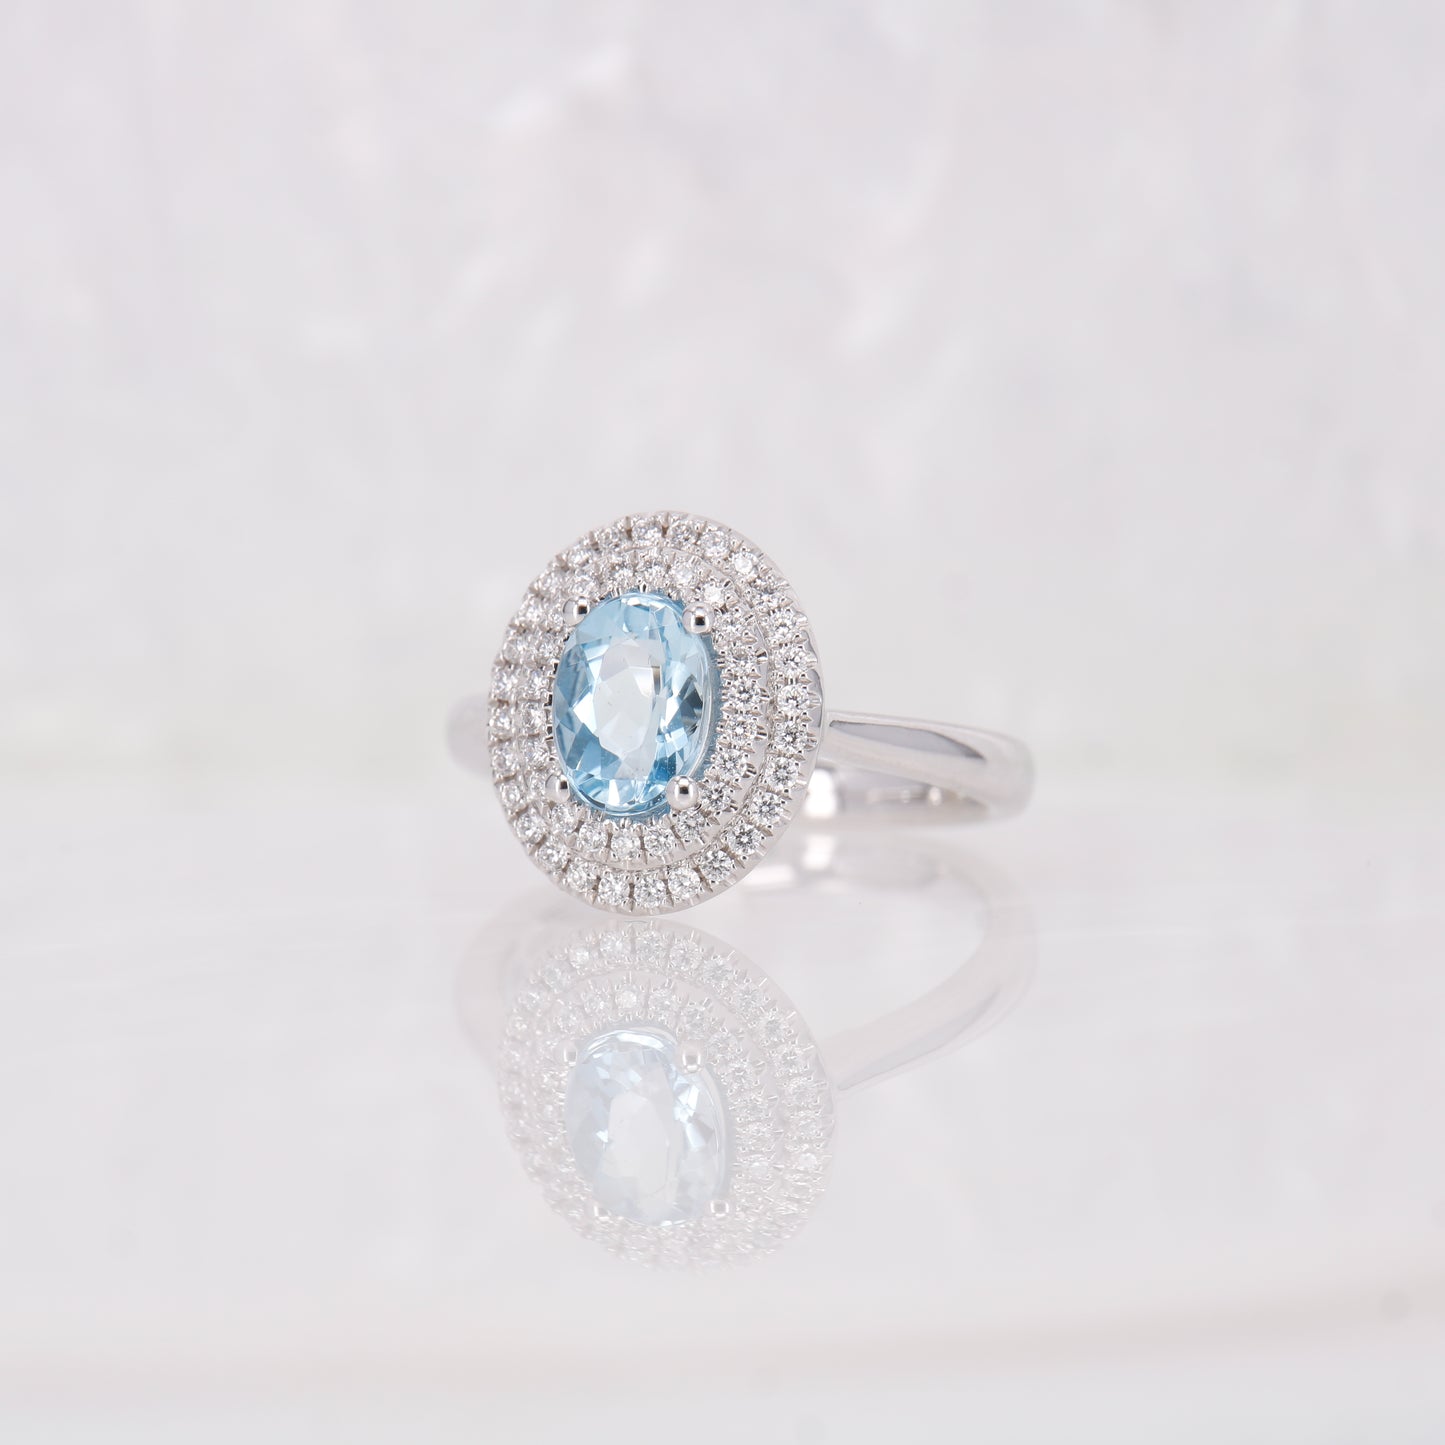 Oval Aquamarine and Diamond Ring featuring a double halo of diamonds. Set in 18ct White Gold. 